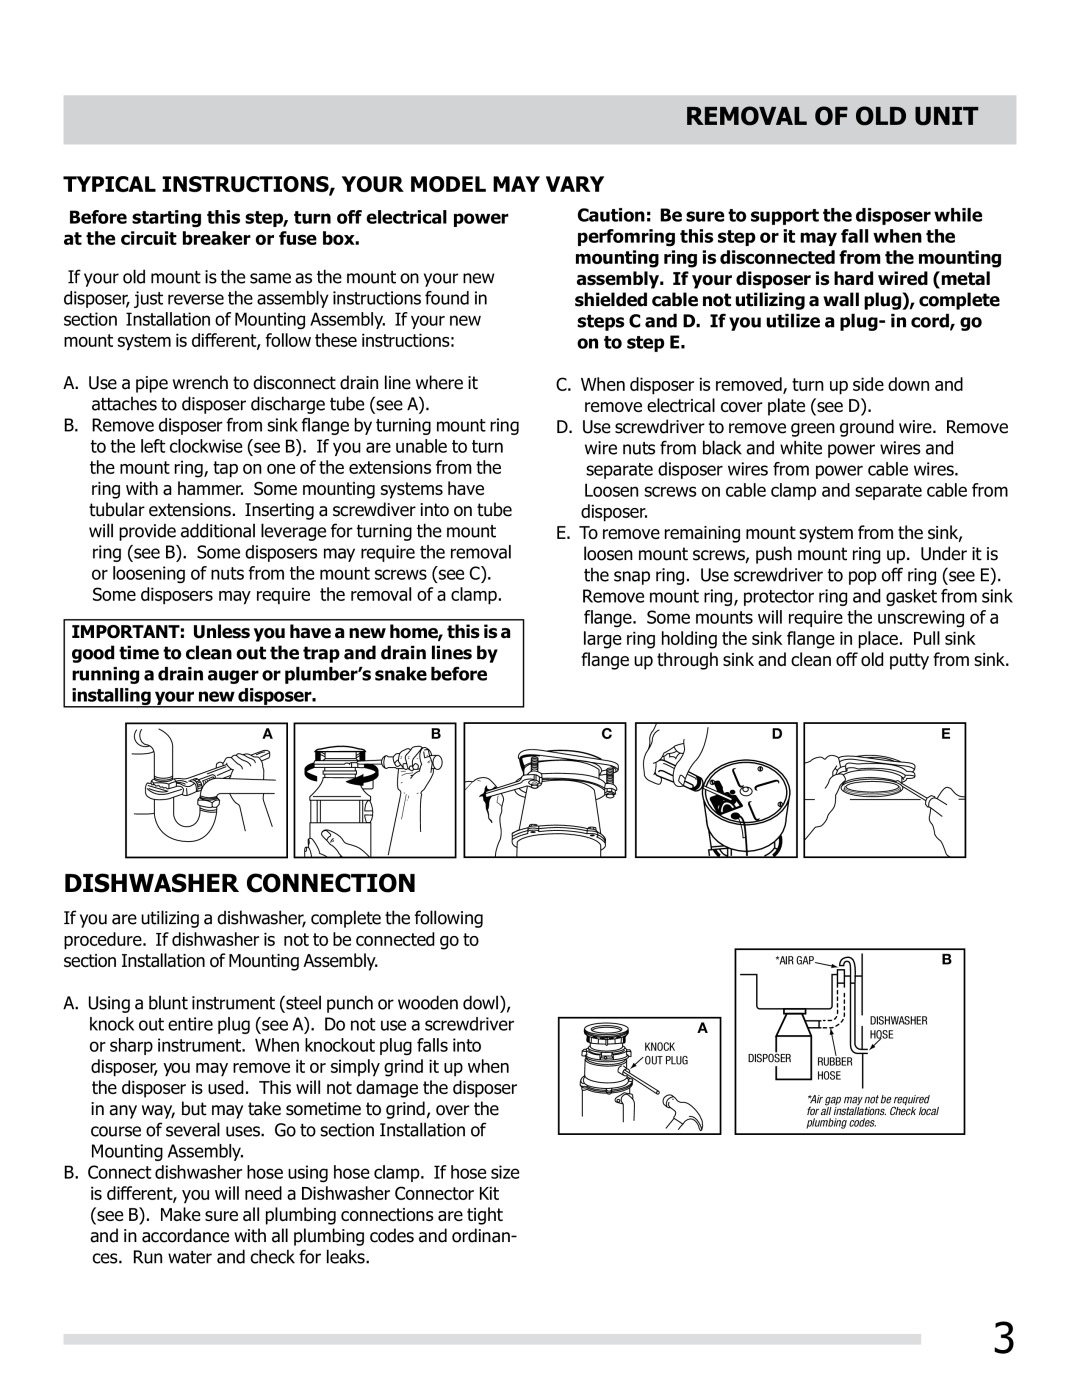 Frigidaire 560C525P02 manual Removal Of Old Unit, Dishwasher Connection, Typical Instructions, Your Model May Vary 